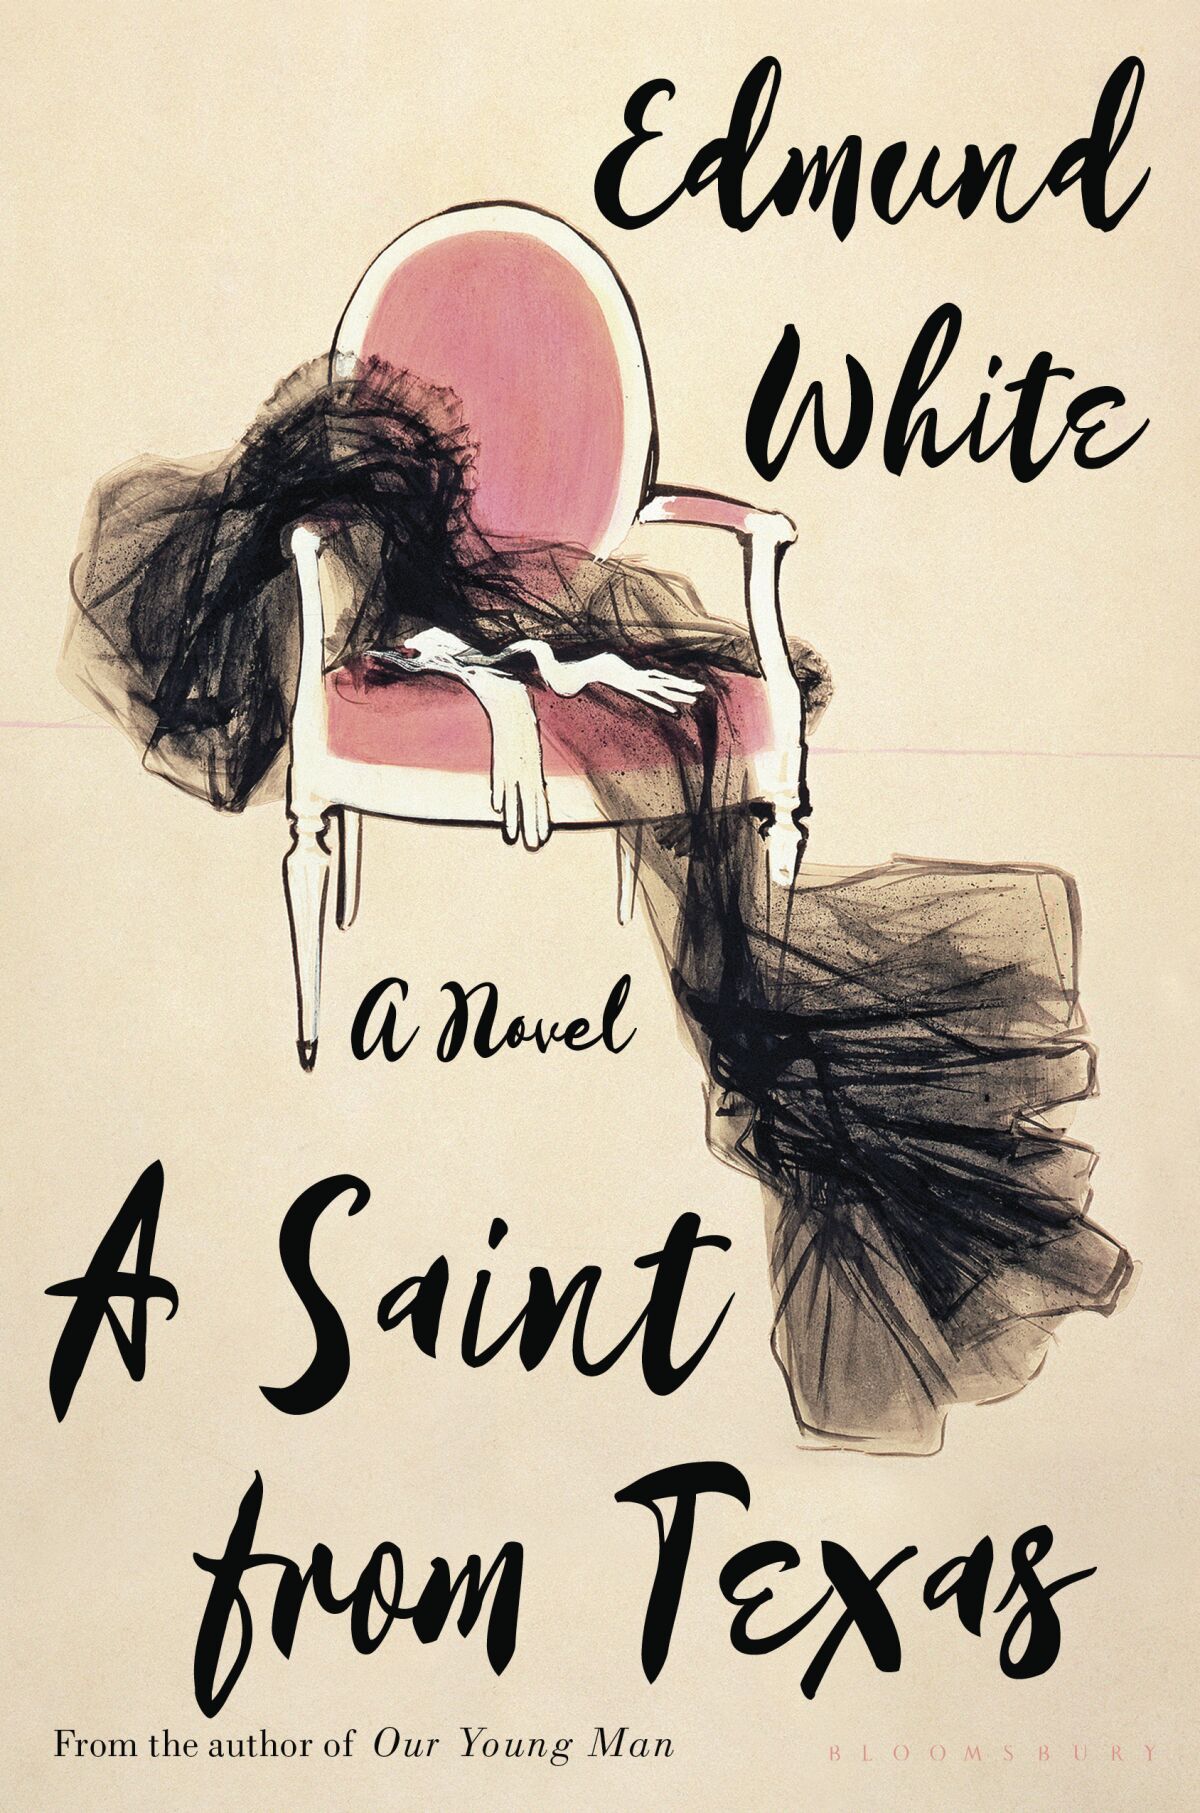 This cover image released by Bloomsbury shows "A Saint from Texas," by Edmund White. (Bloomsbury via AP)